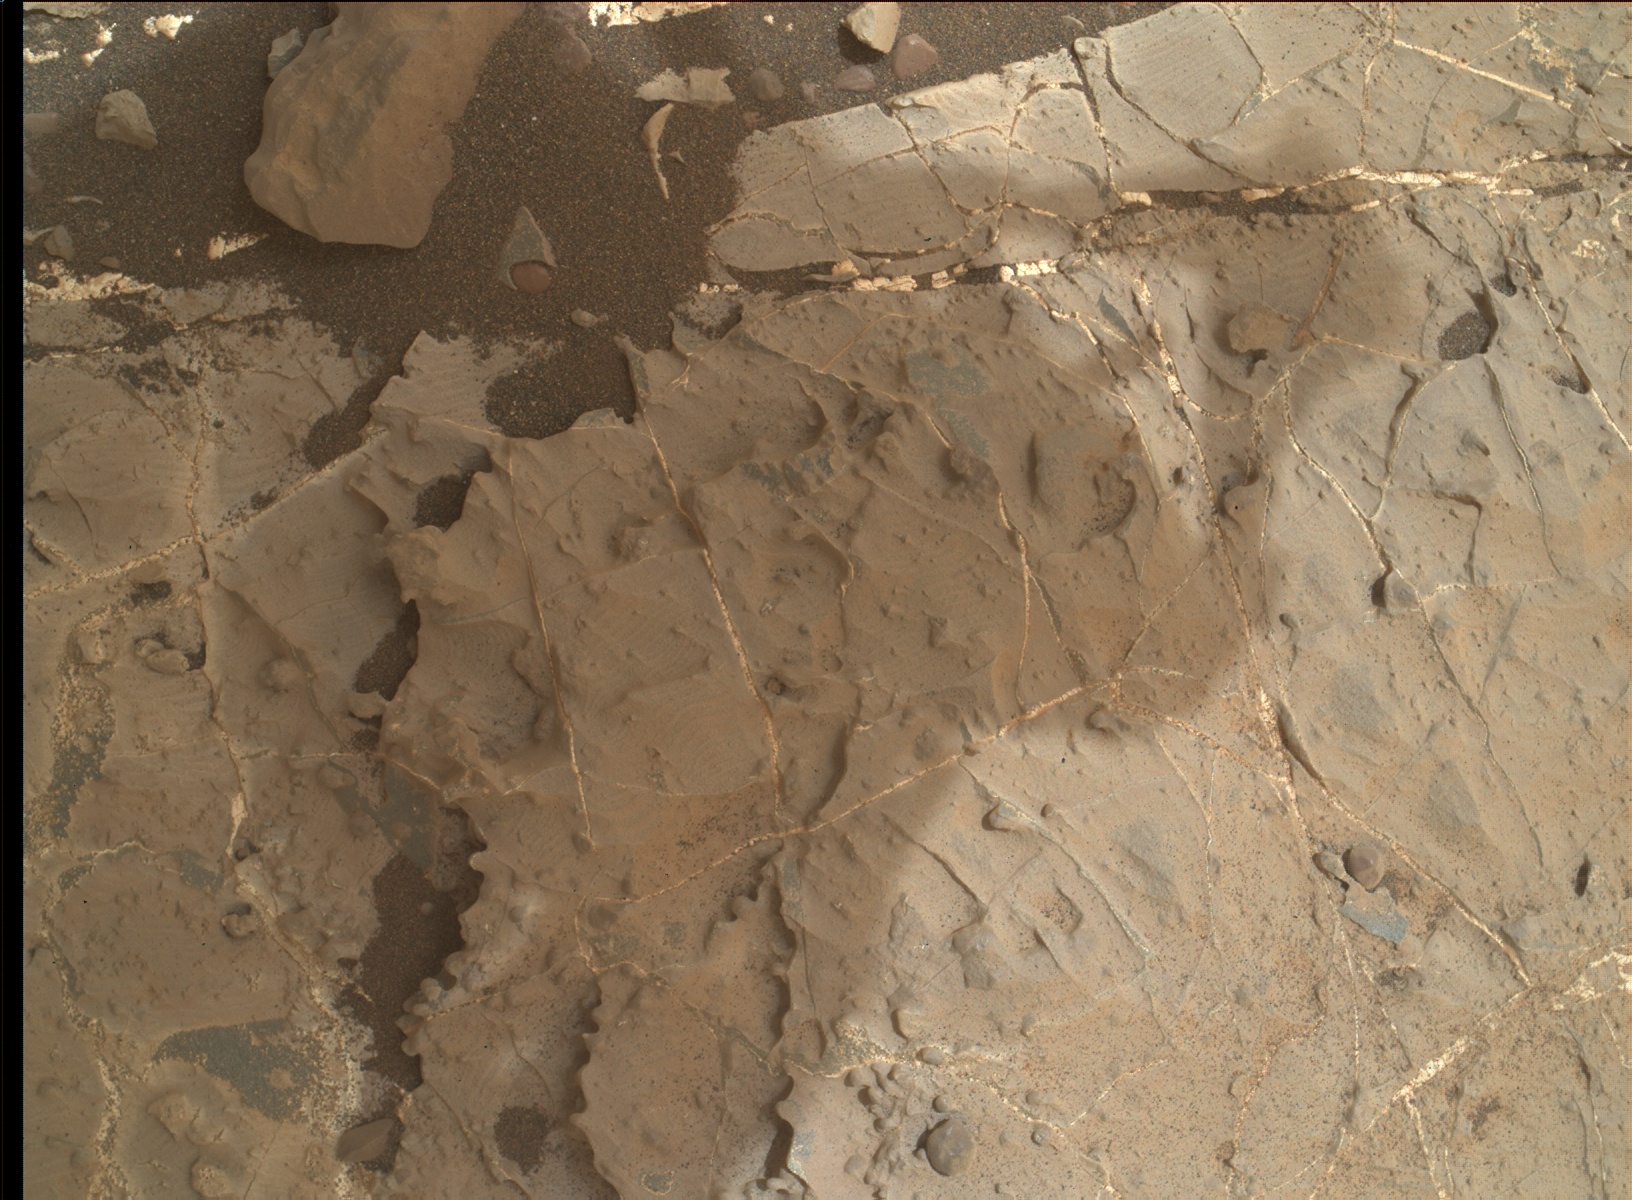 Nasa's Mars rover Curiosity acquired this image using its Mars Hand Lens Imager (MAHLI) on Sol 2166